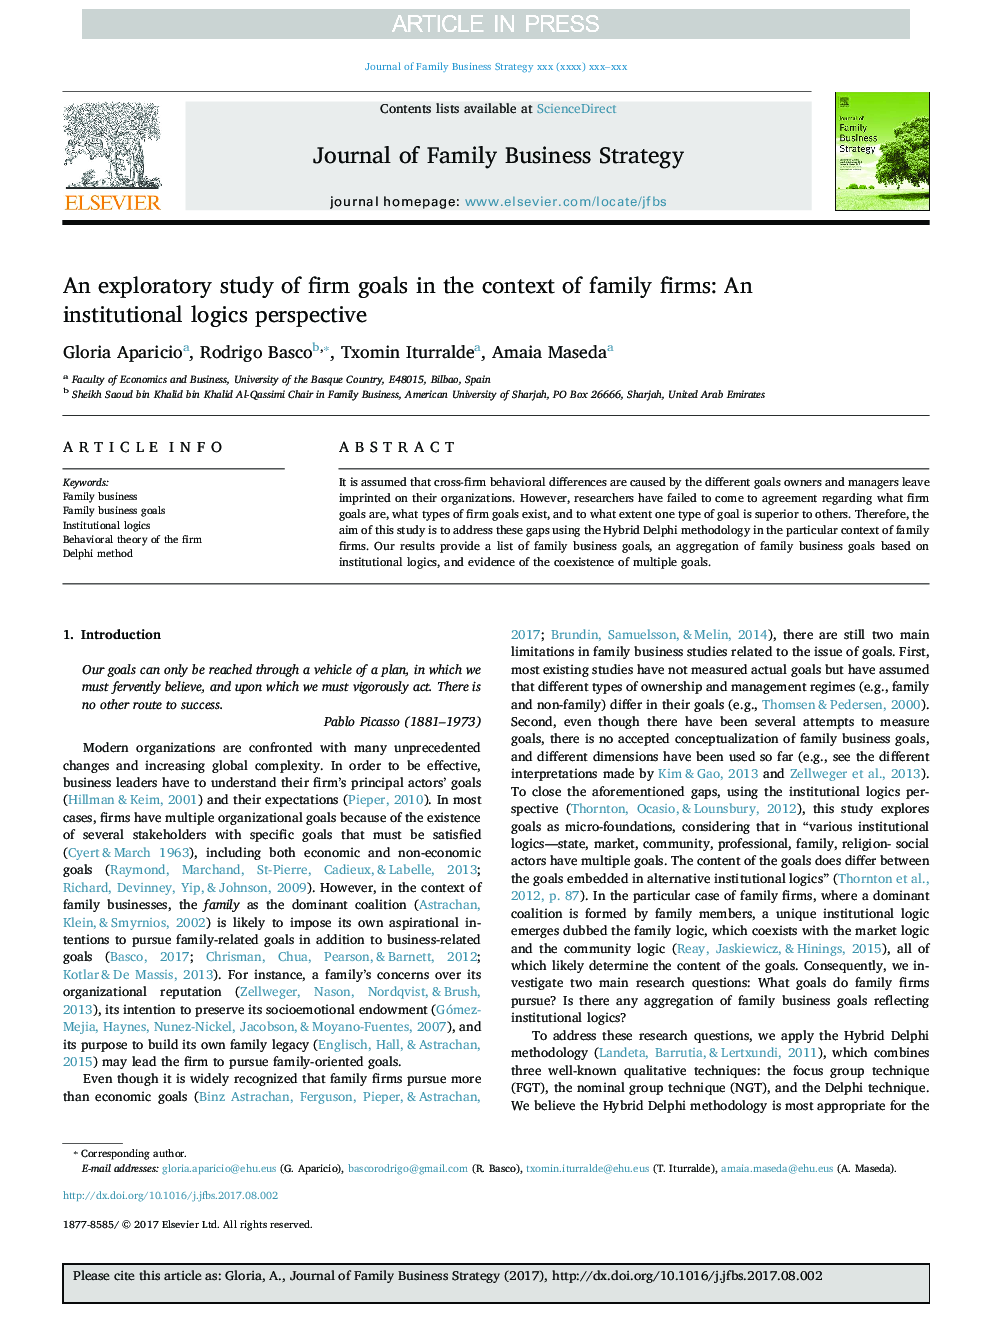 An exploratory study of firm goals in the context of family firms: An institutional logics perspective